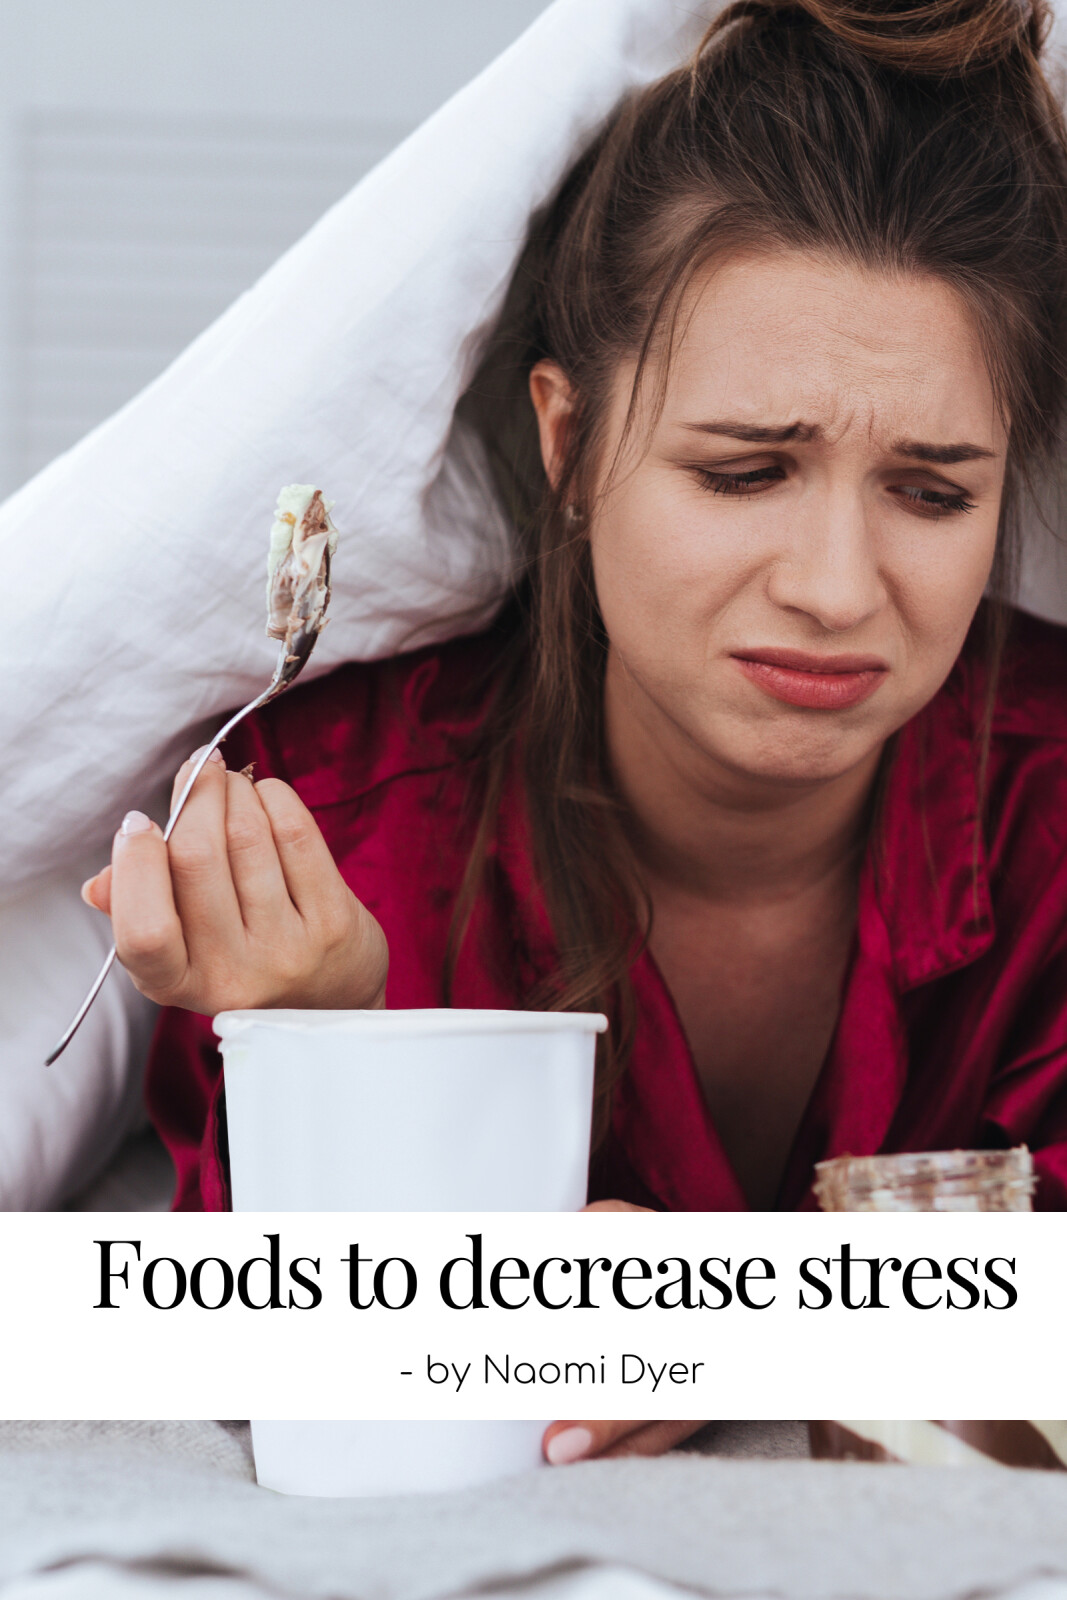 Foods to decrease stress!